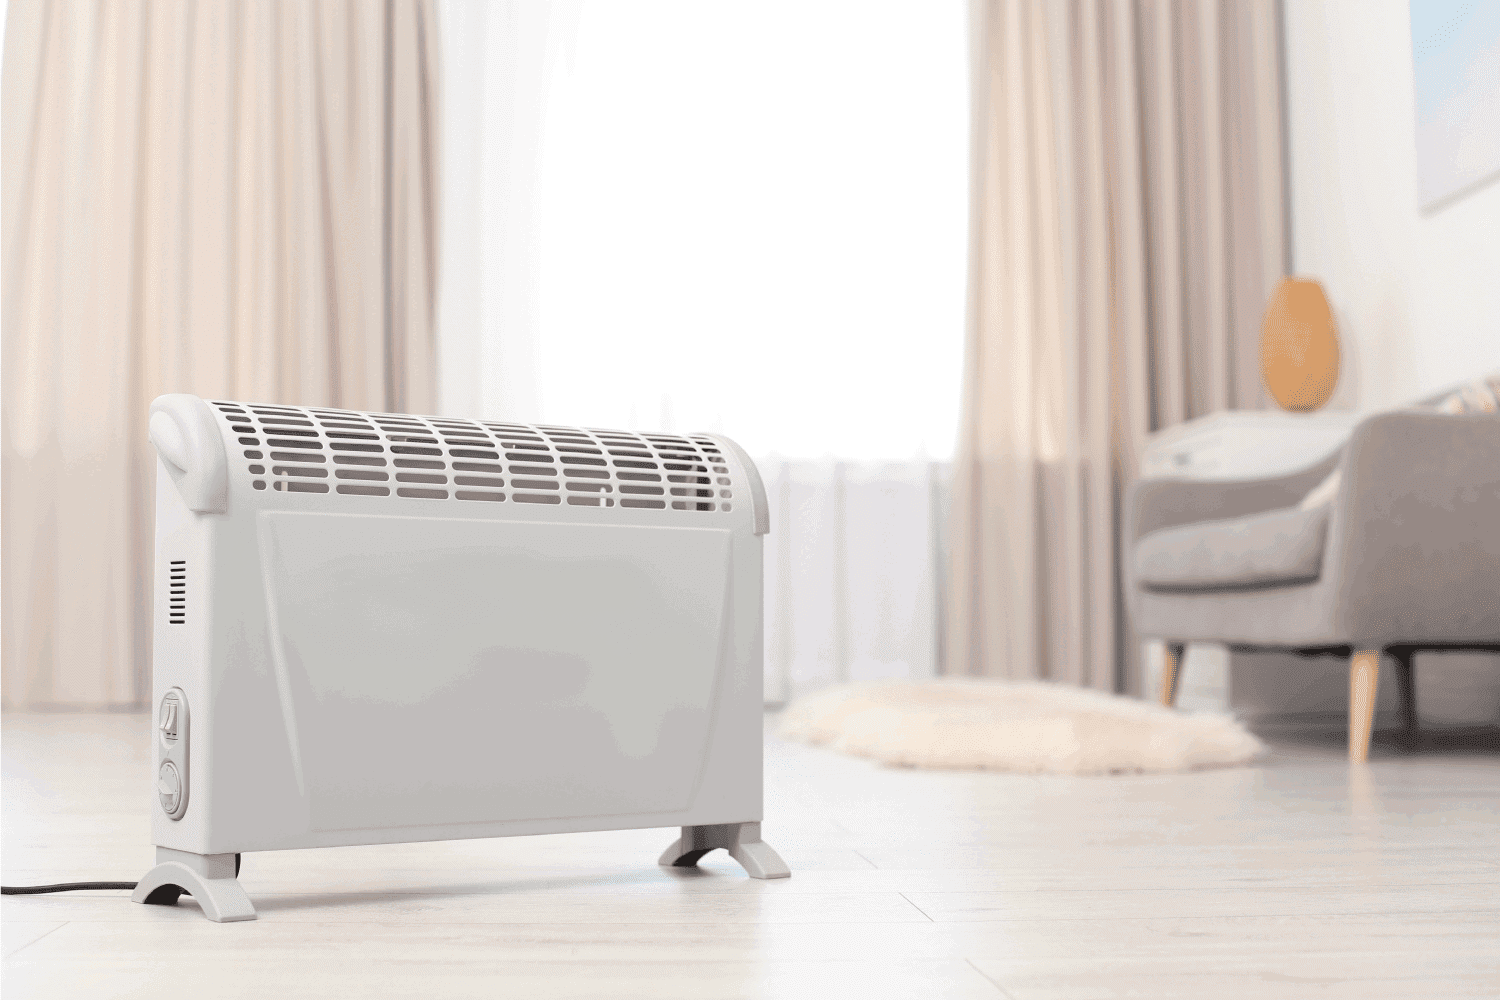 Modern electric heater on floor at home